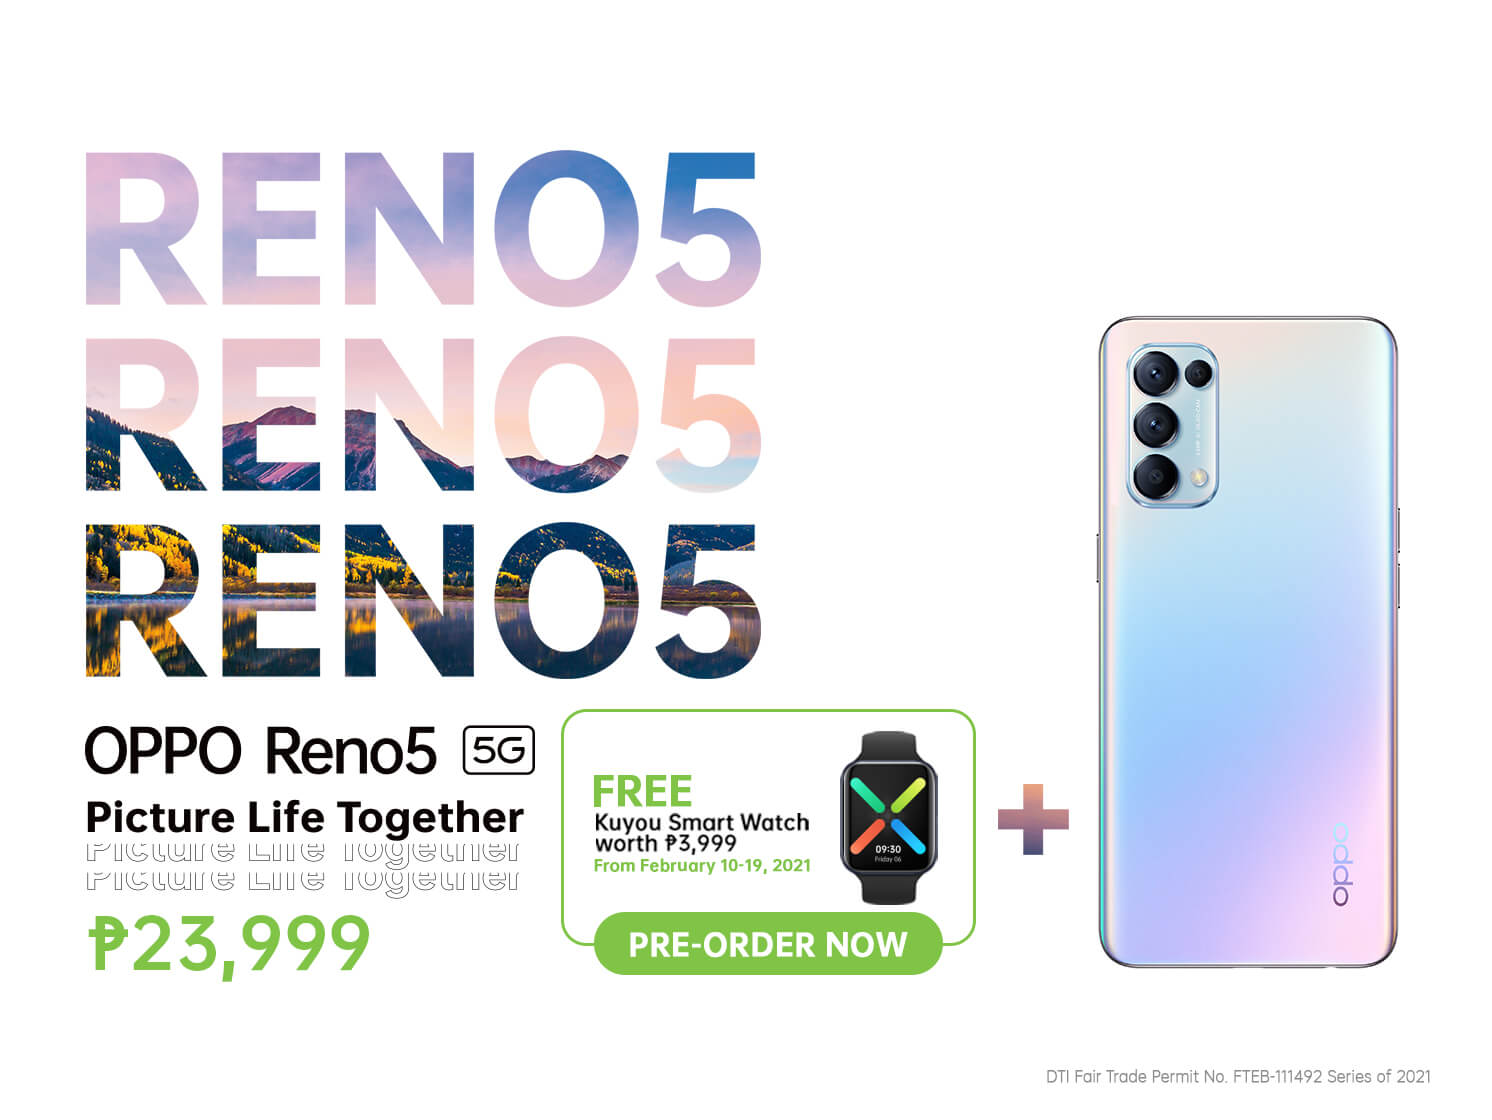 Pre-order the newest OPPO Reno5 series! | OPPO Philippines